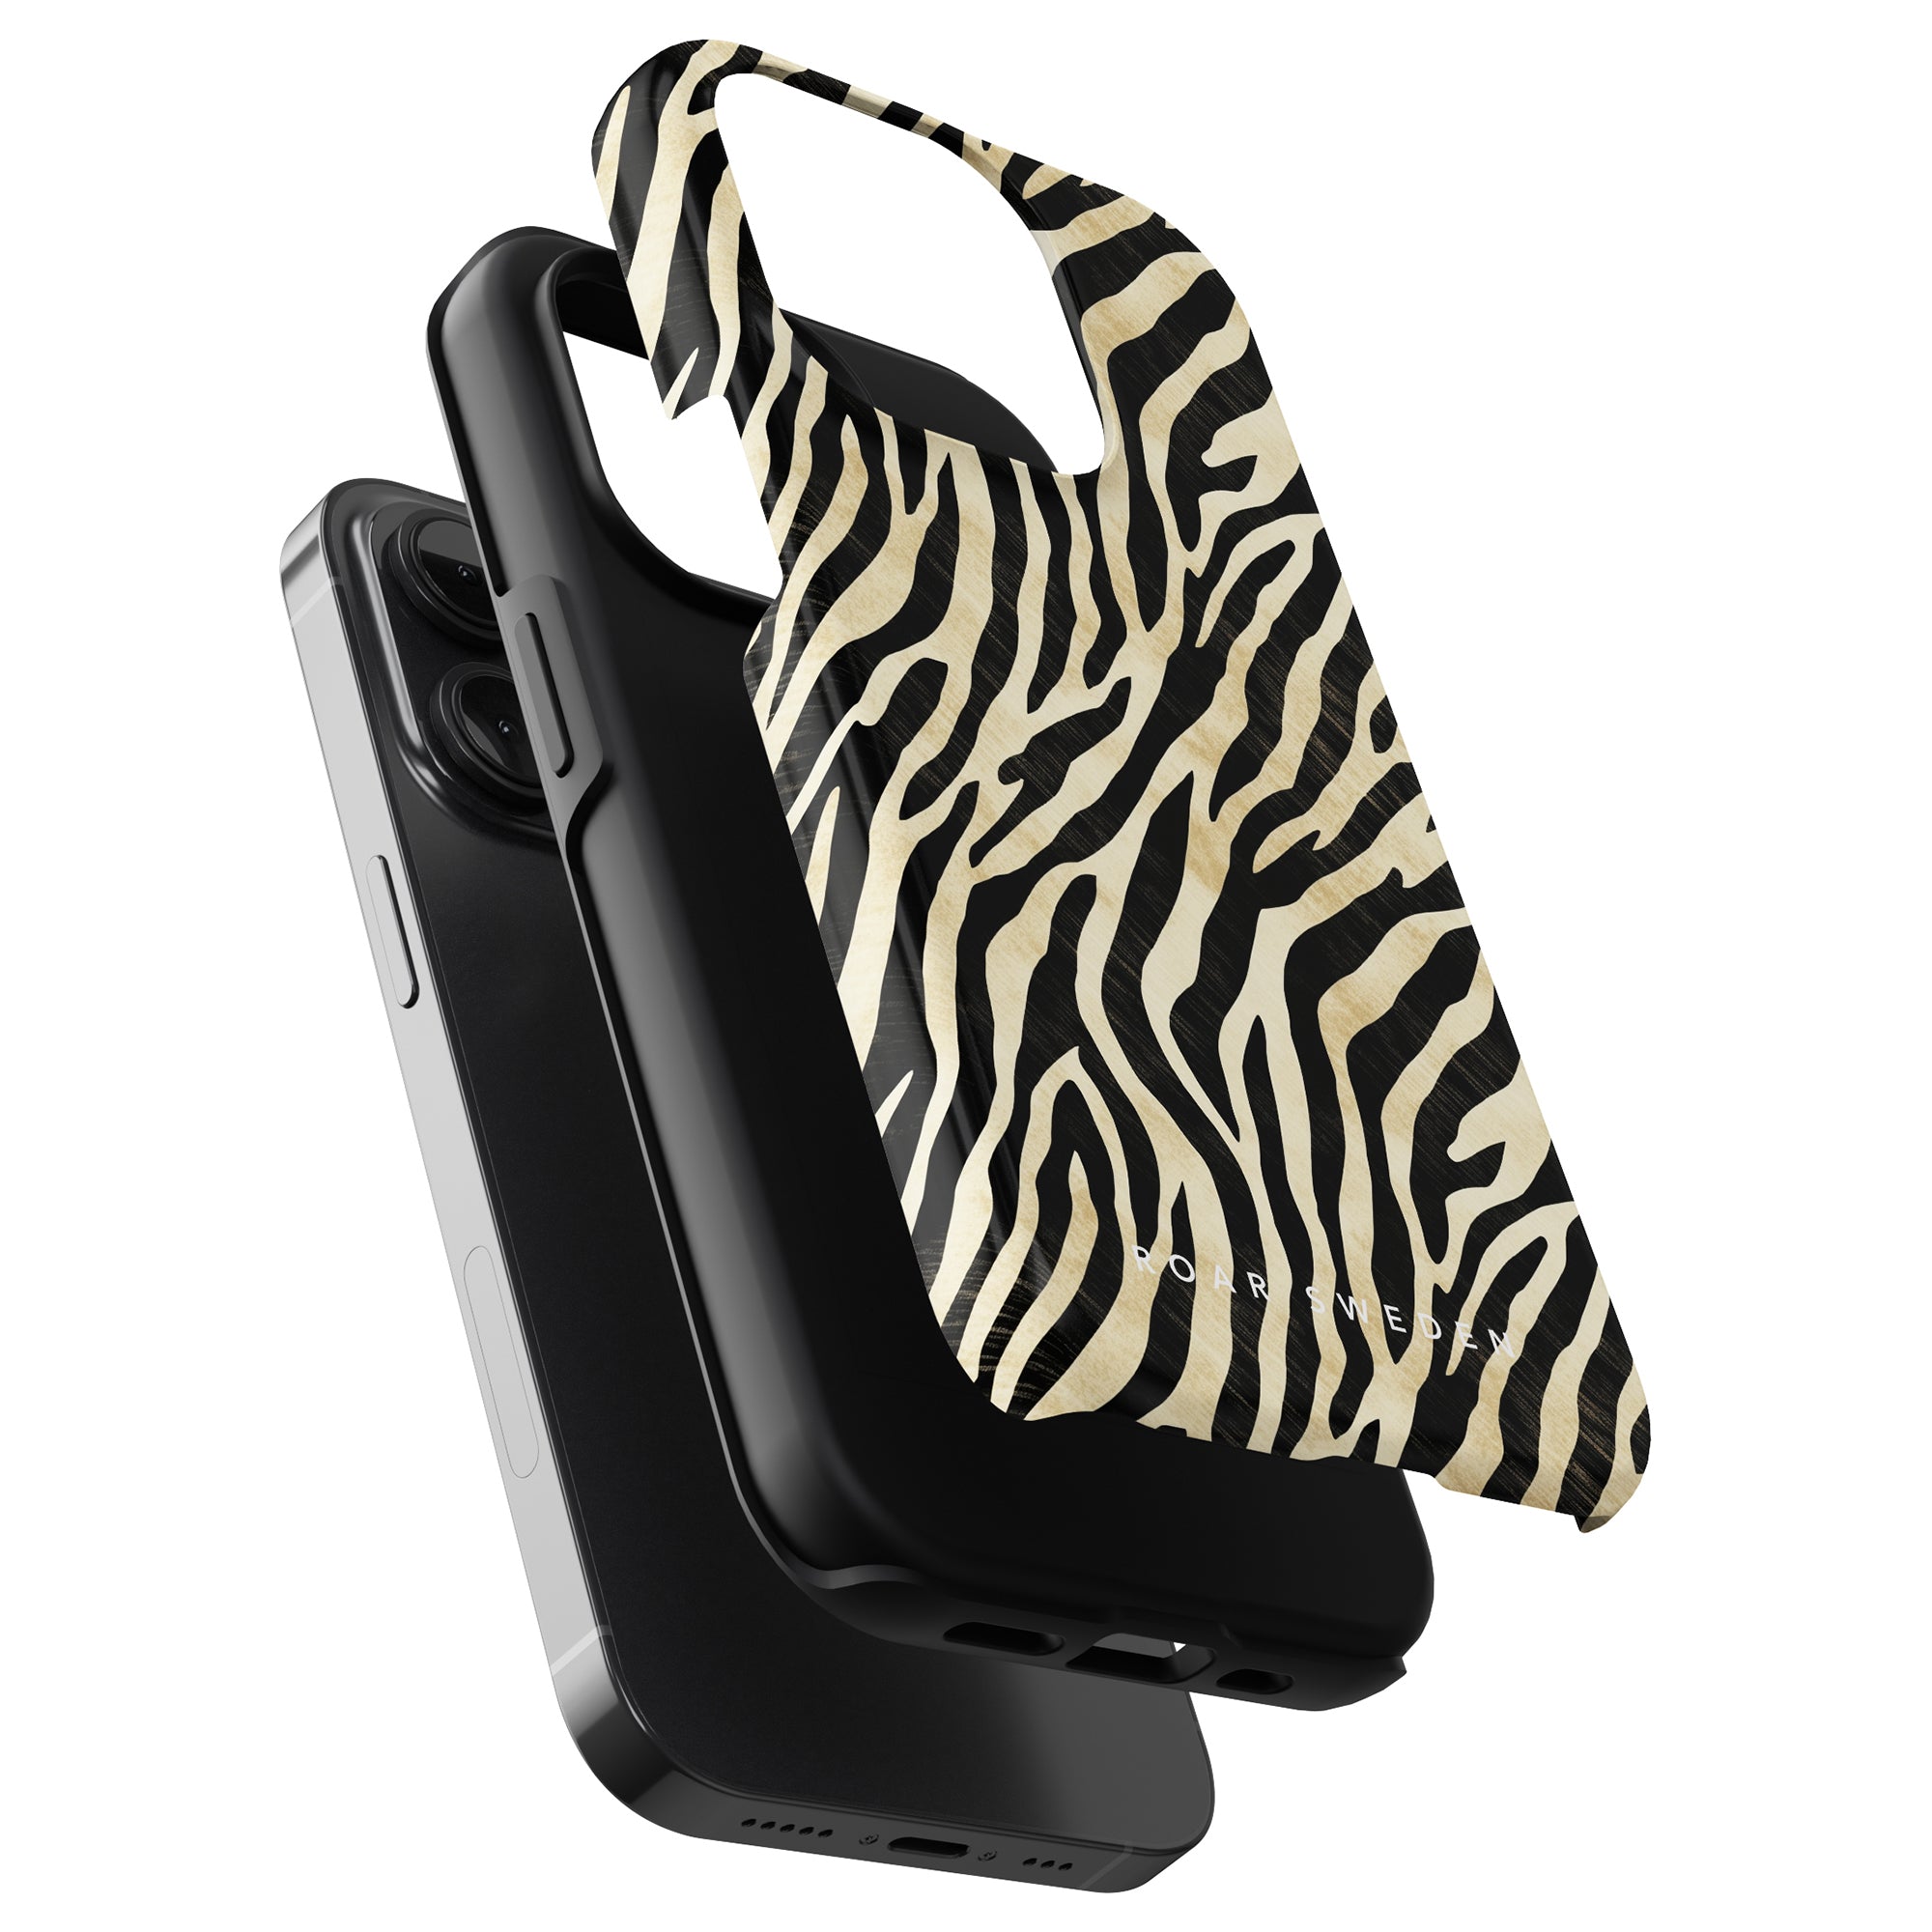 This black smartphone sports a robust skydd protection with a two-layer design: the inner layer is plain black, while the outer flaunts a striking zebra stripe pattern from the "Marty - Tough Case" collection.